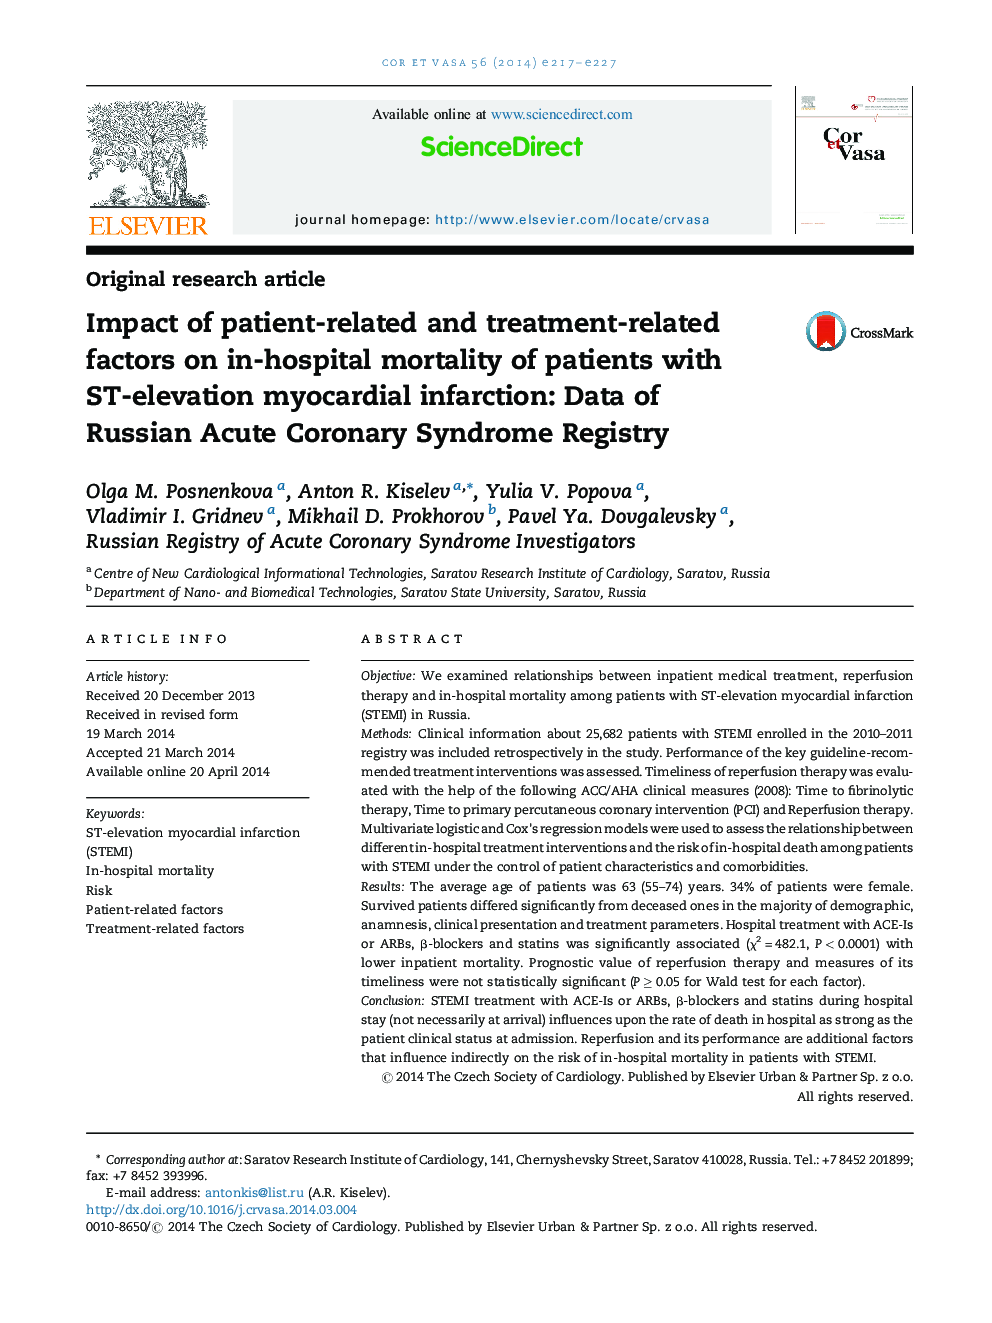 Original research articleImpact of patient-related and treatment-related factors on in-hospital mortality of patients with ST-elevation myocardial infarction: Data of Russian Acute Coronary Syndrome Registry